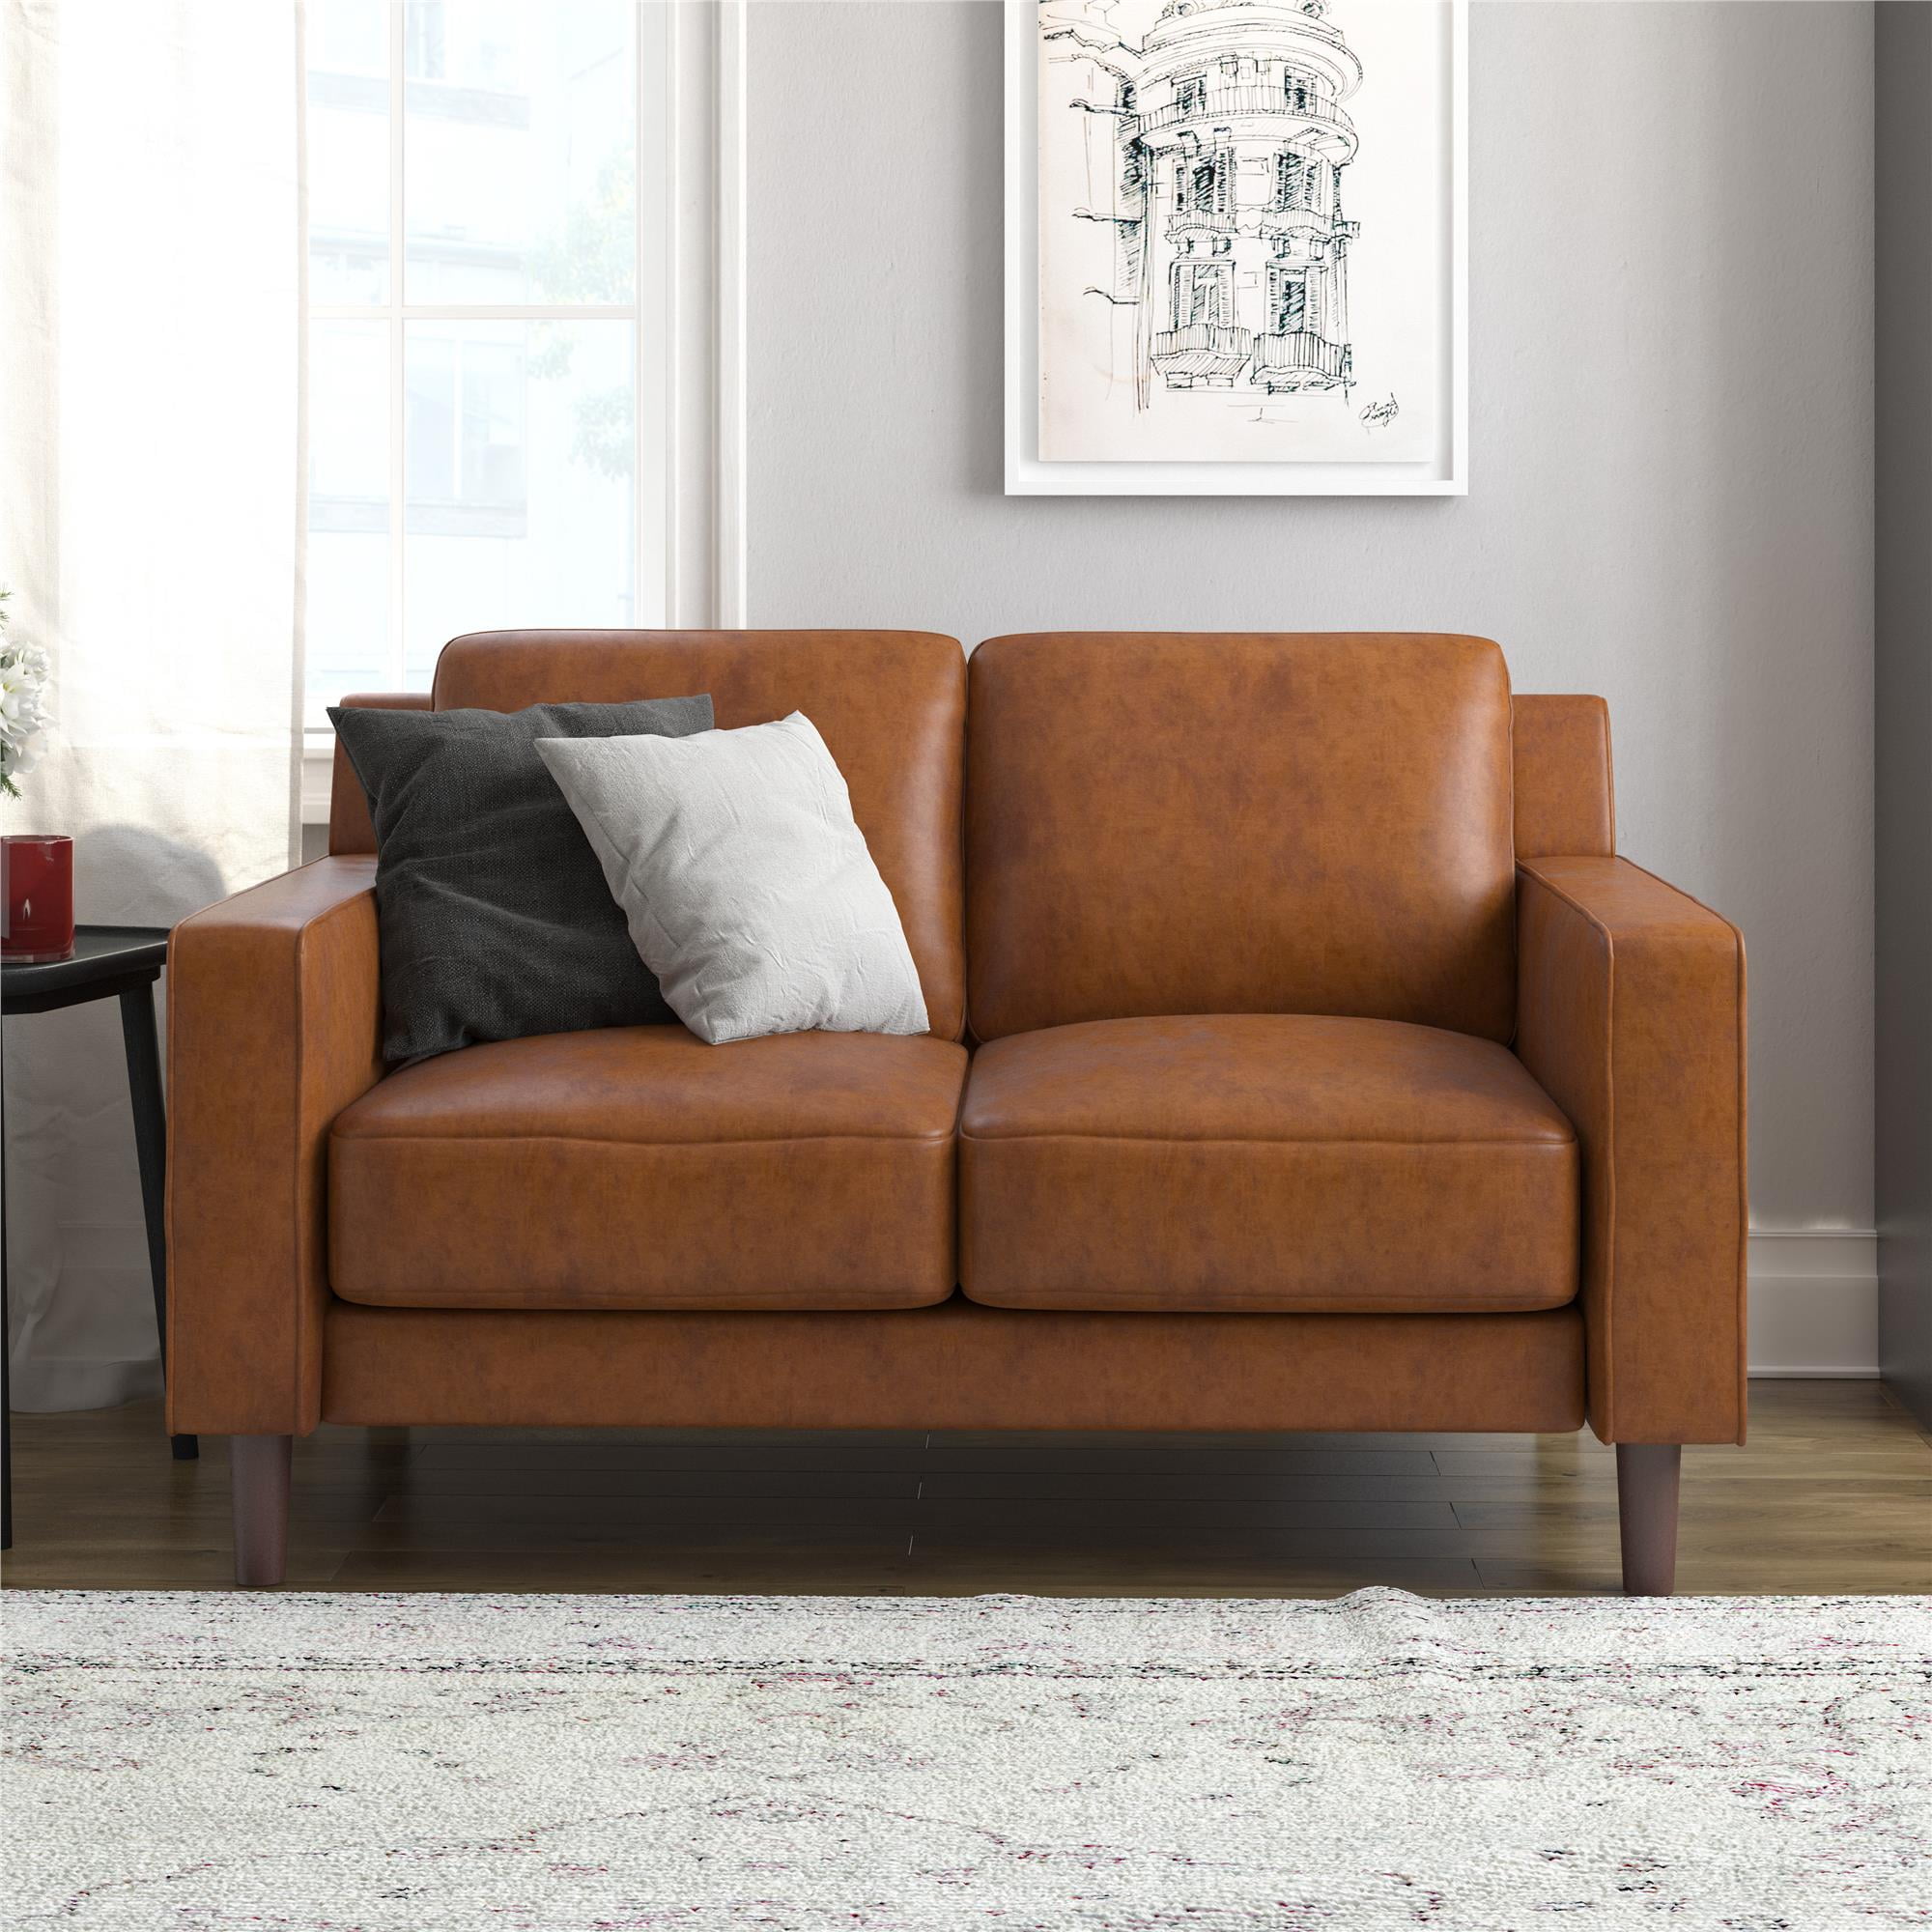 DHP Bryanna Loveseat 2 Camel Faux Leather Sofa Seater 